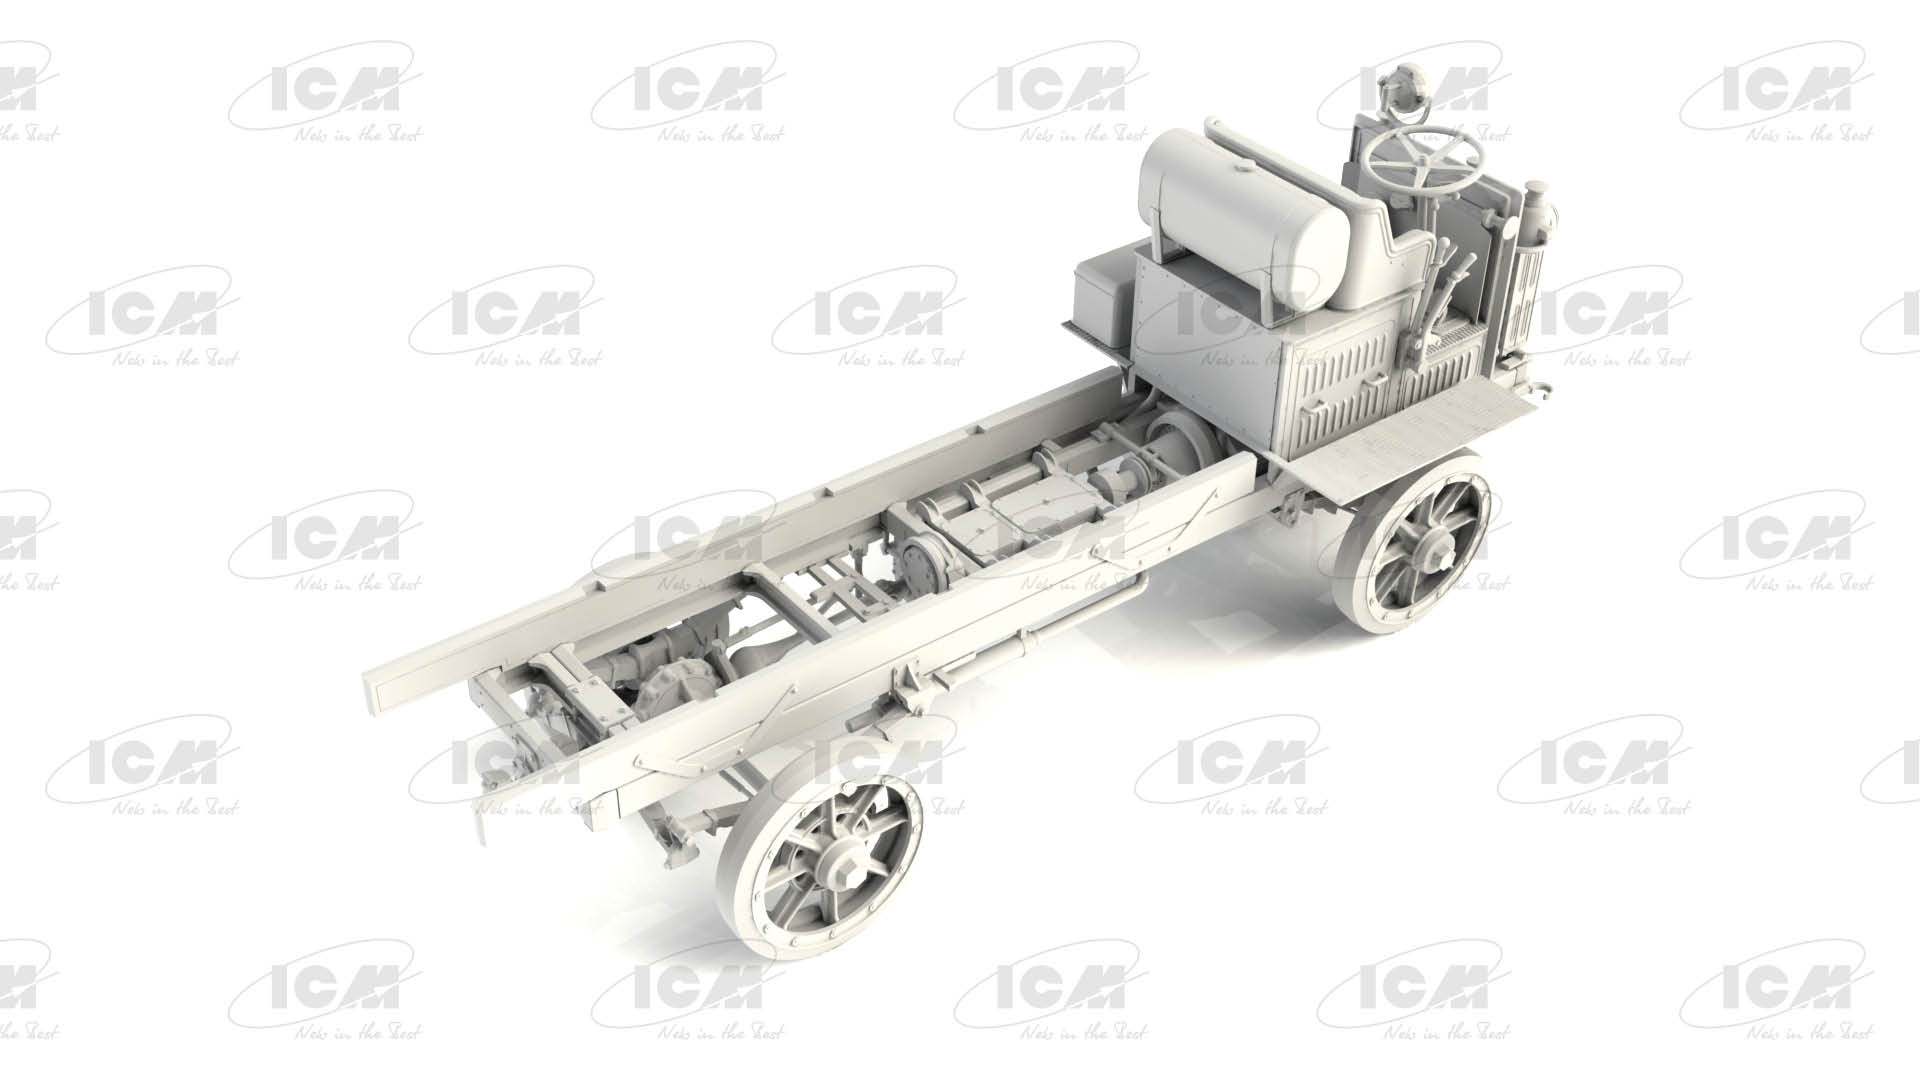 scale Model Kit 1fwd Type B WWI US Army Truck 1/35 ICM 35655 for sale online 